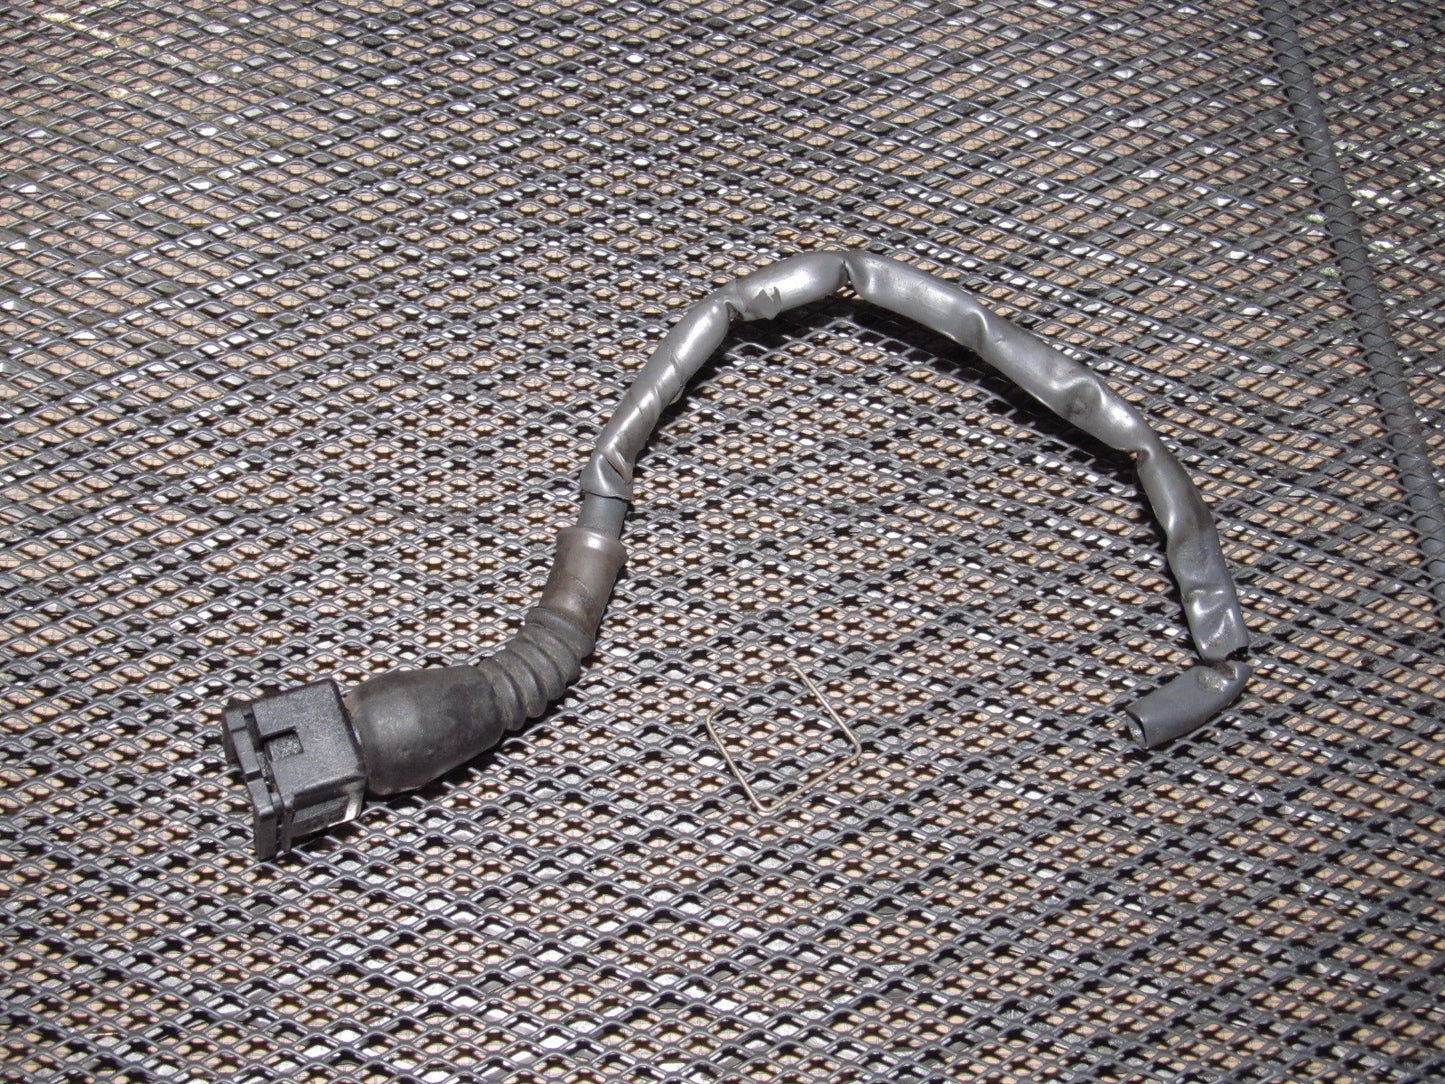 89 90 91 92 Toyota Supra OEM Cold Start Fuel Injector Pigtail Harness - 7MGTE Turbo